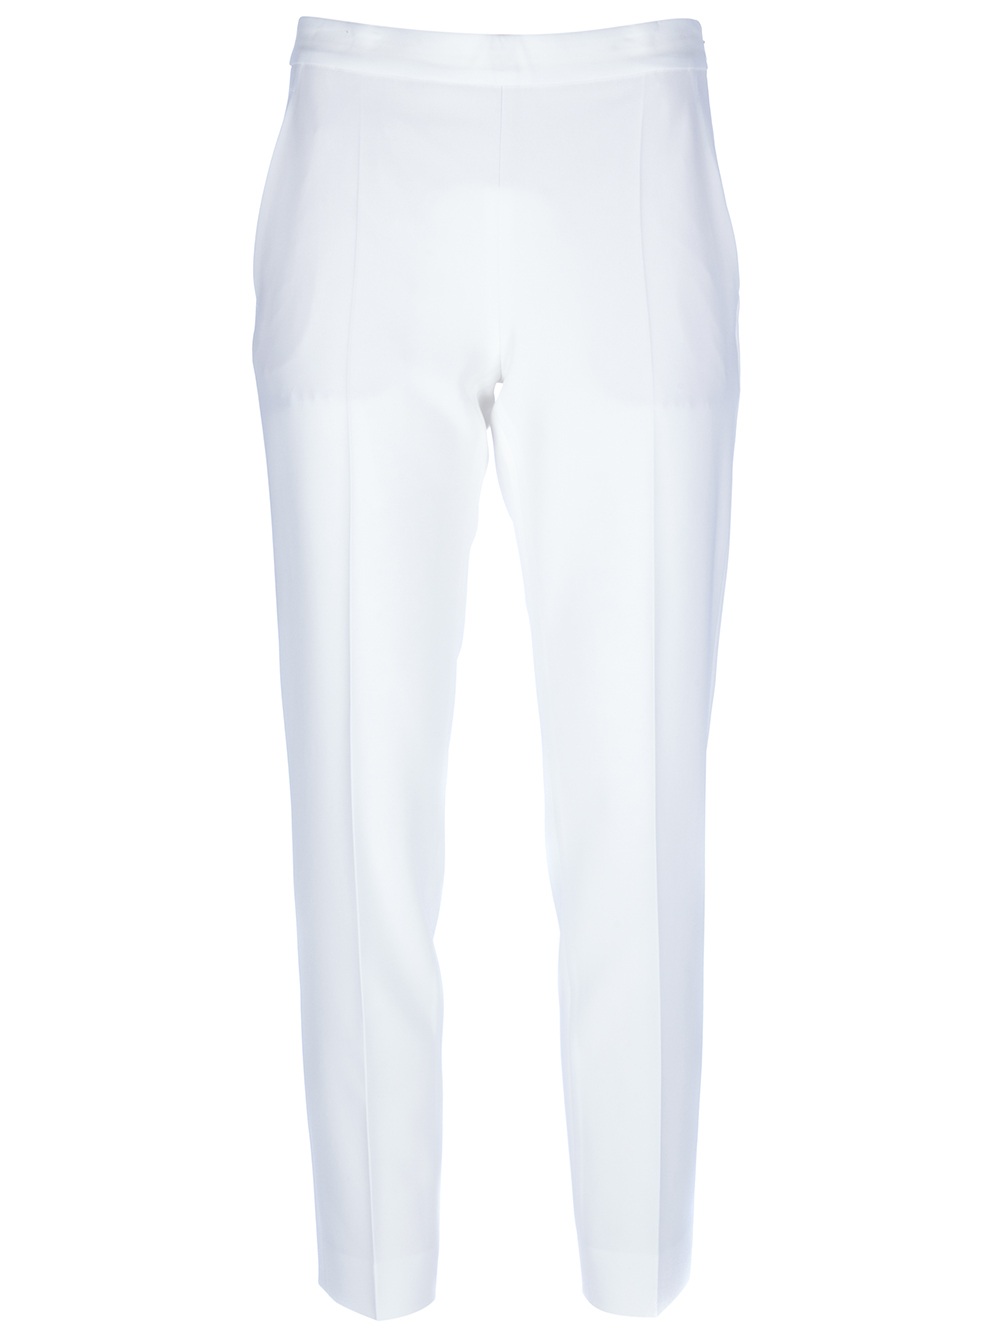 Moschino Slim Fit Trousers in White | Lyst